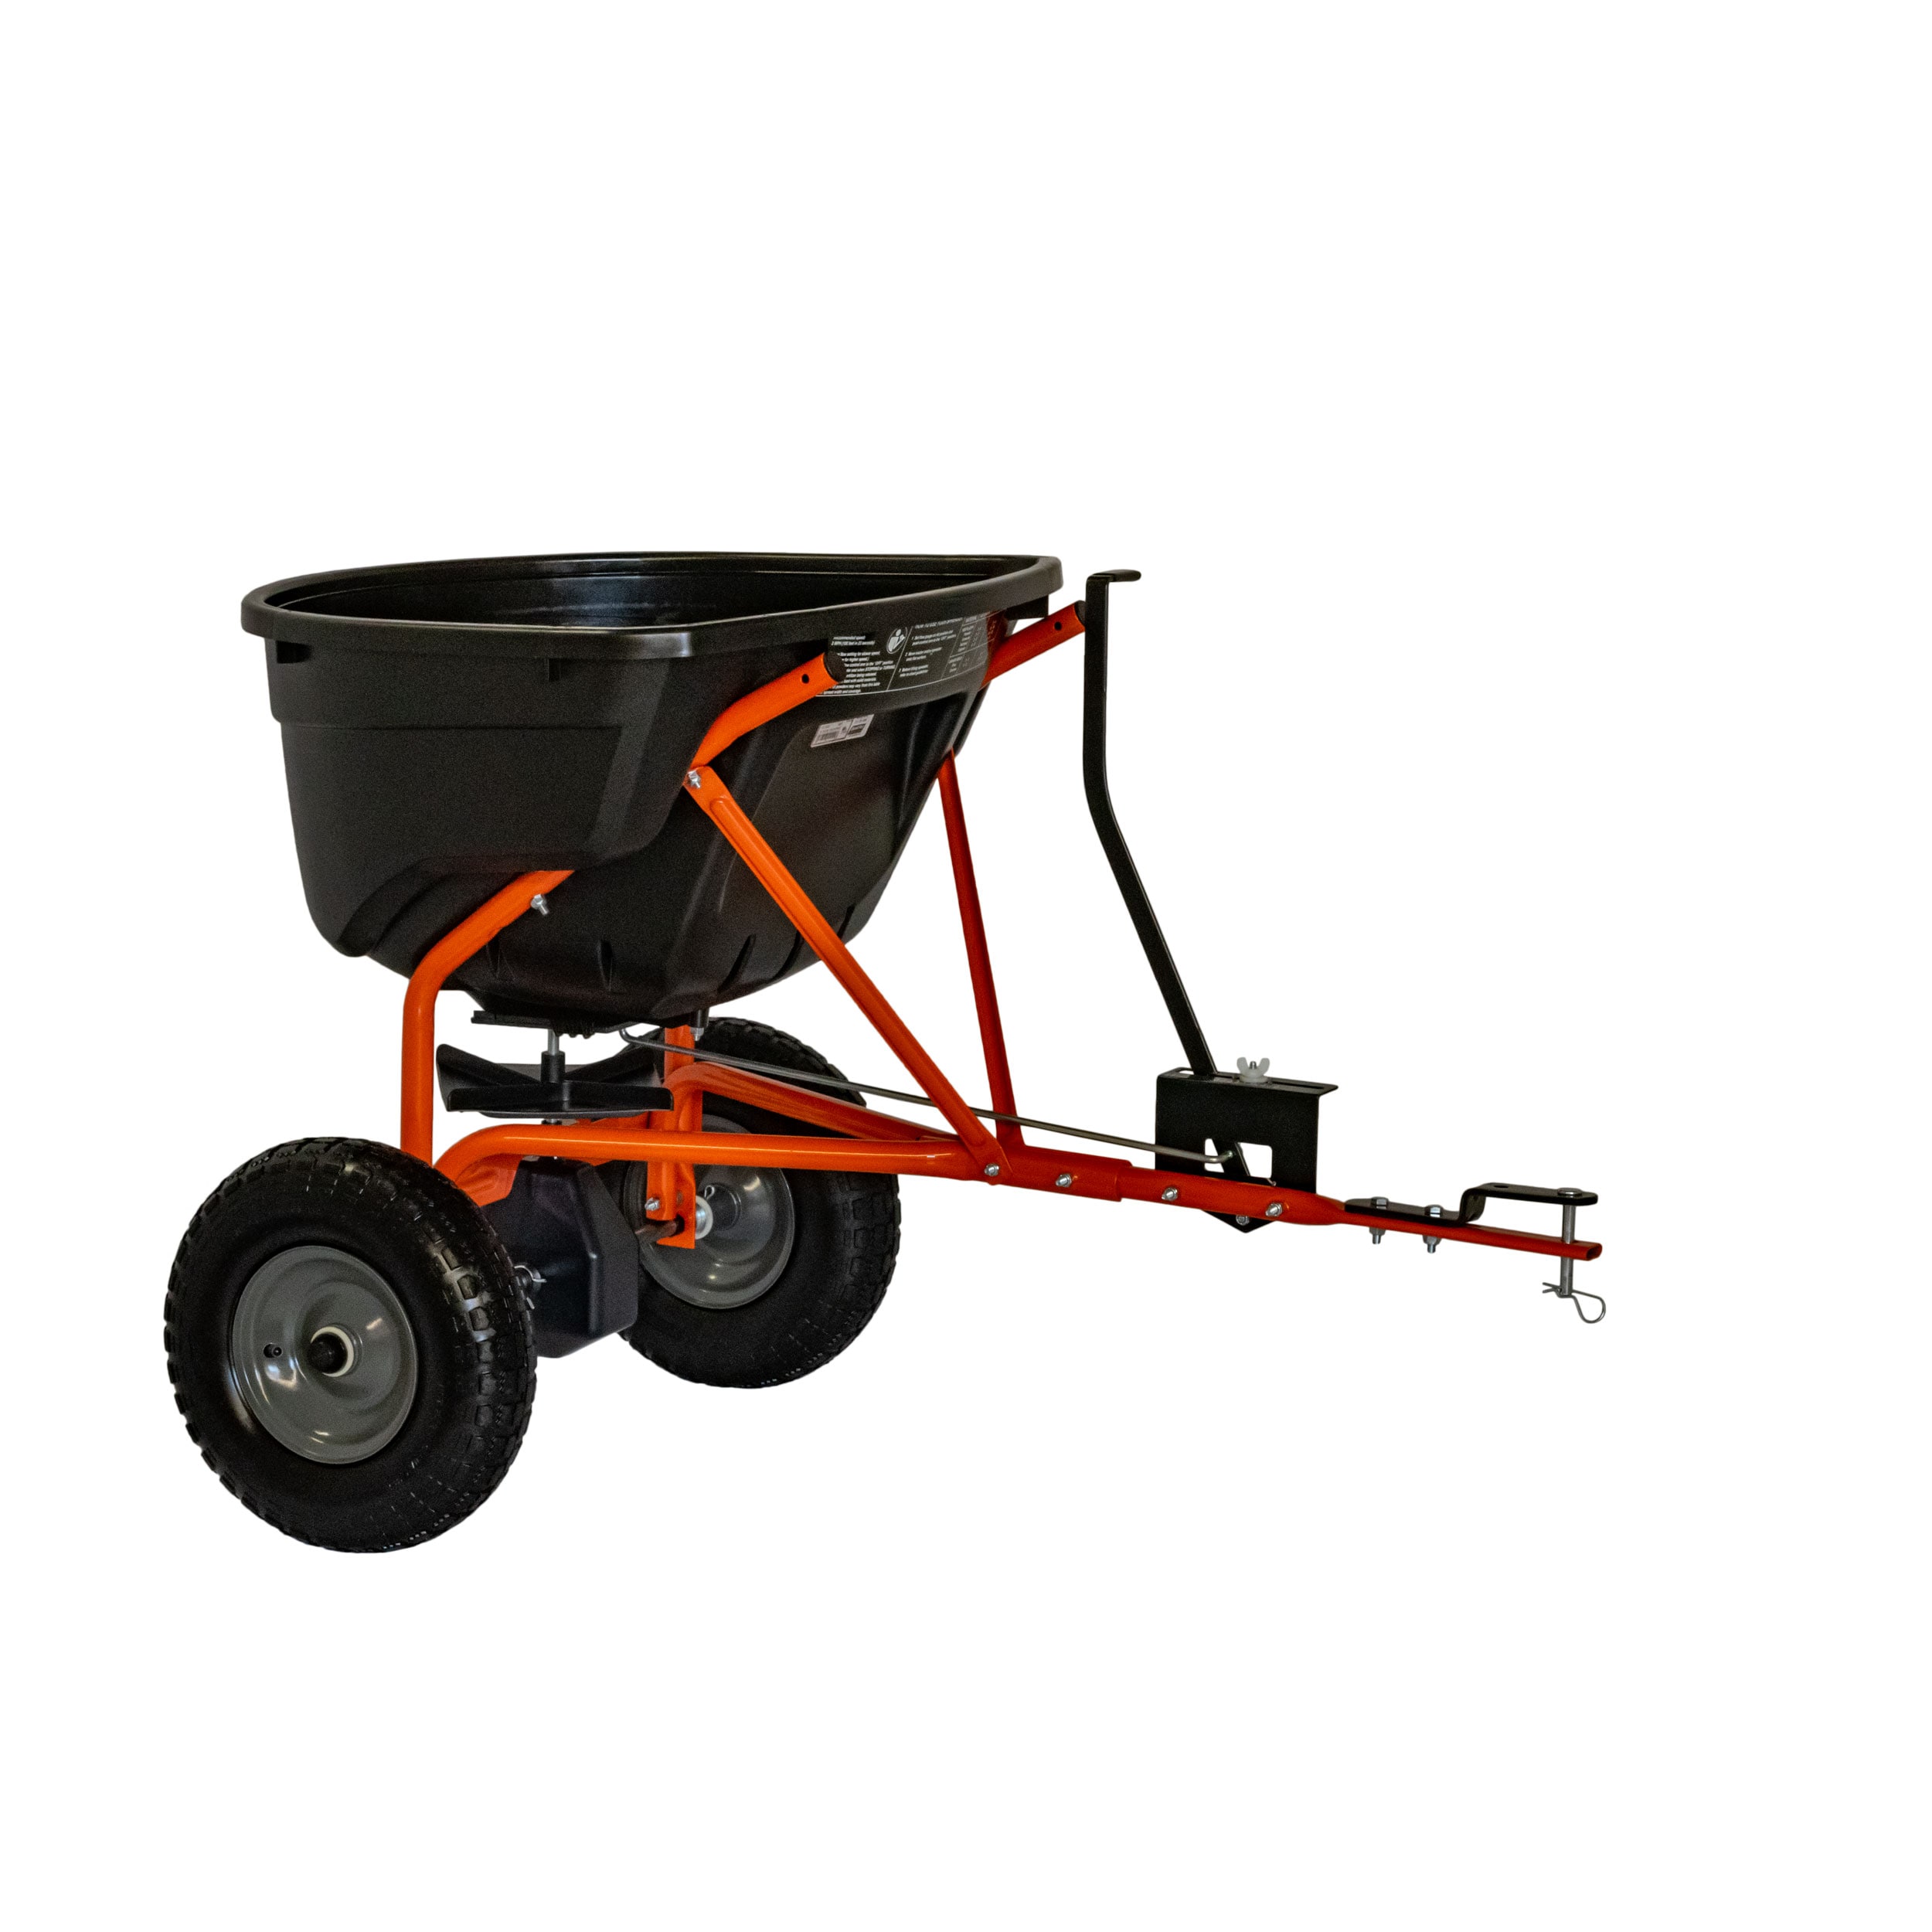 Agri-Fab 45-0463 130-Pound Tow Behind Broadcast Spreader 